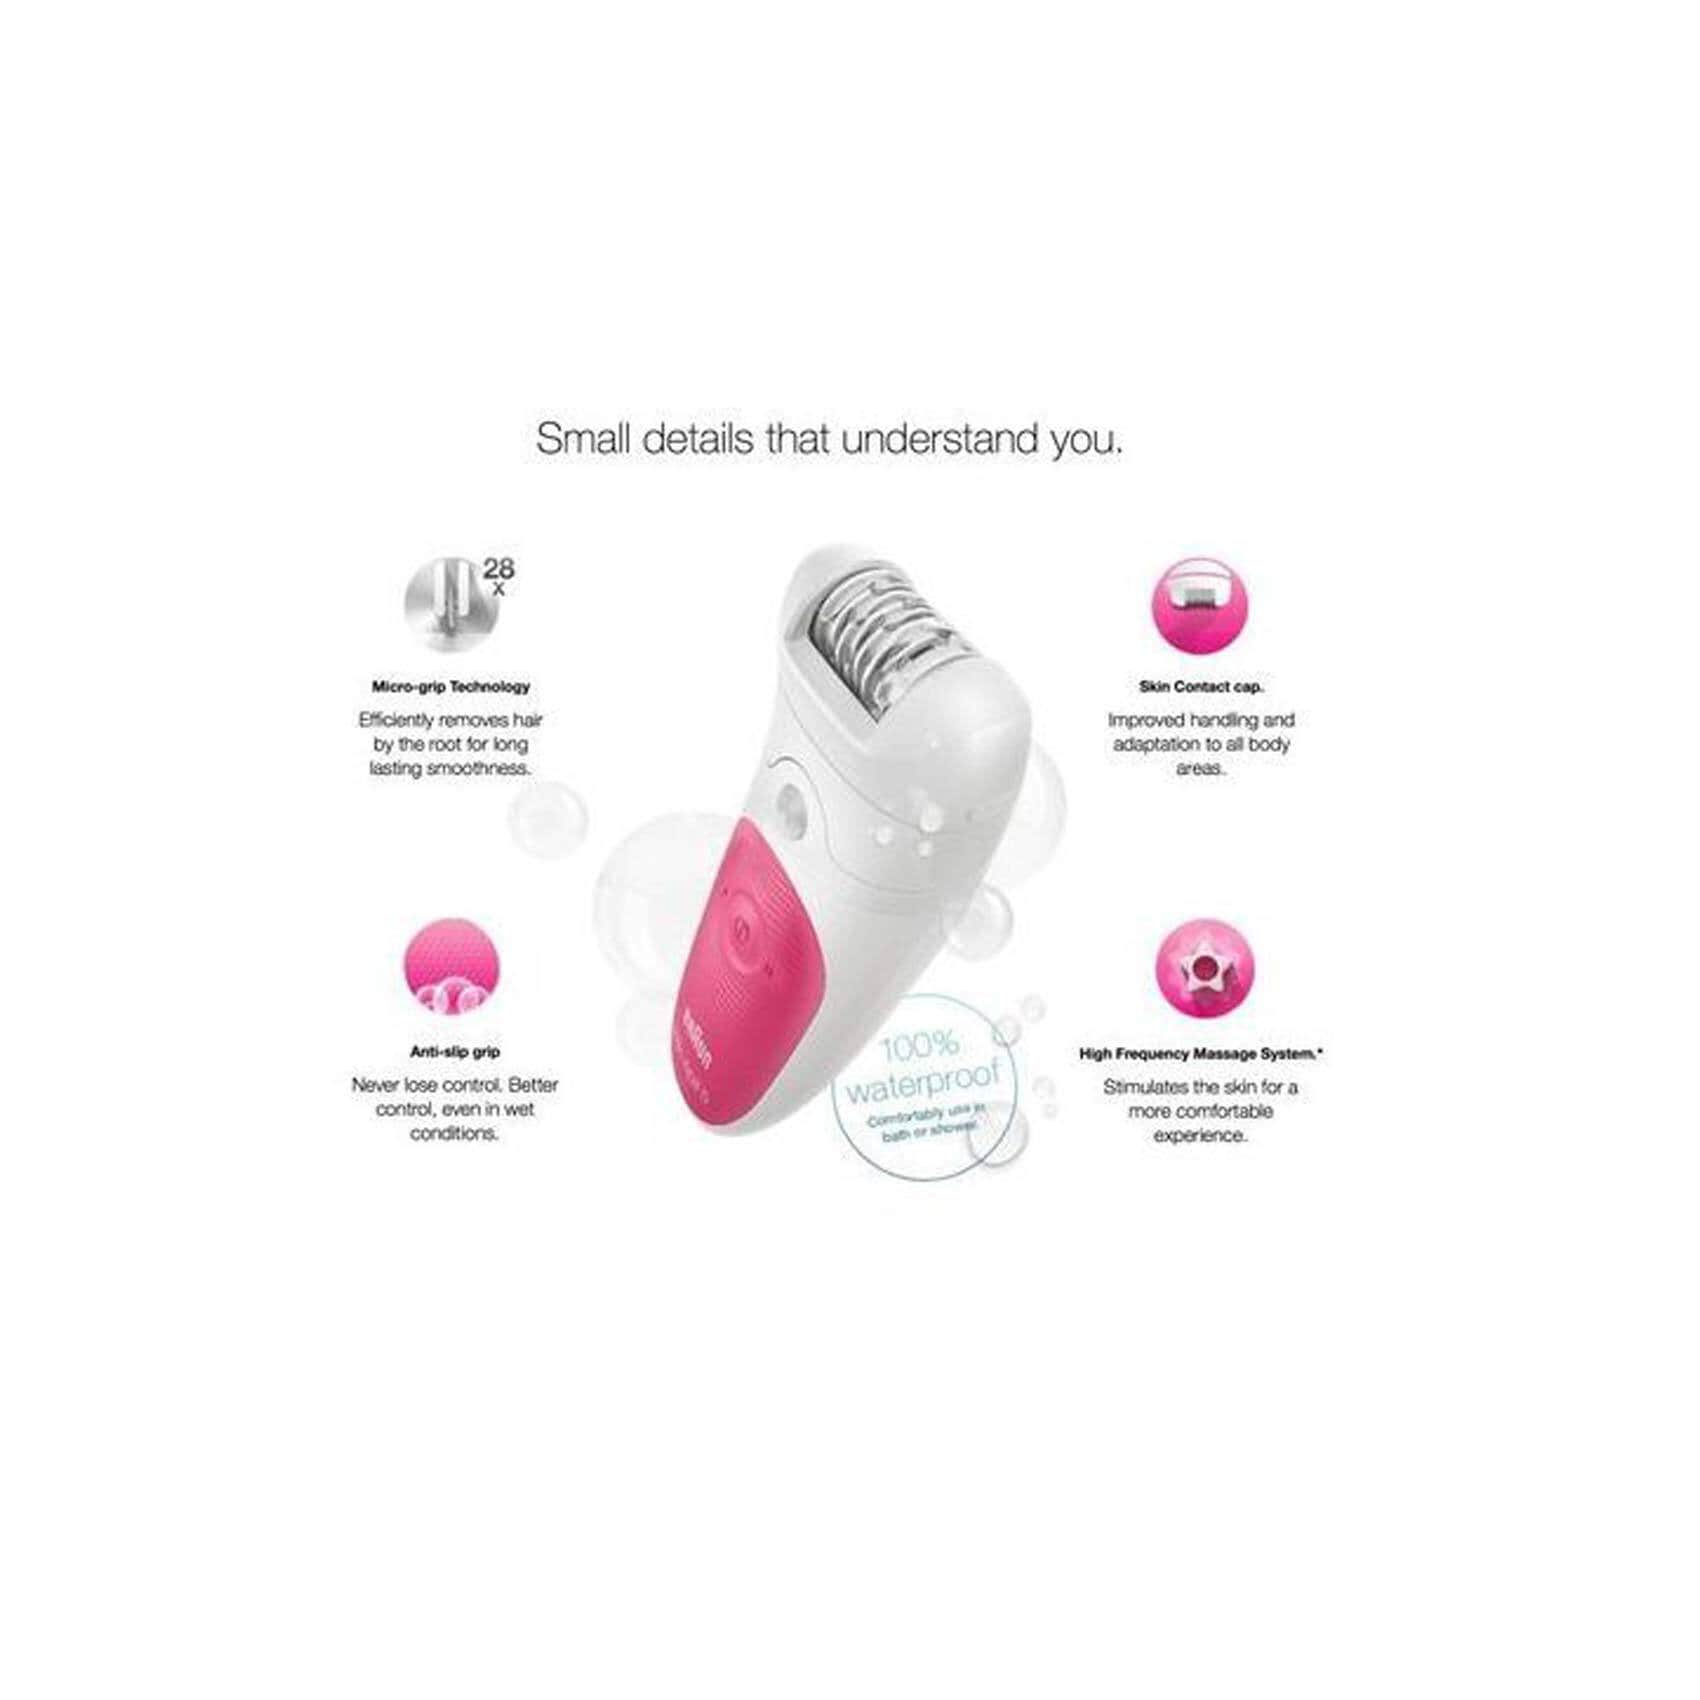 Buy Braun 5-513 Silk Epil Pink and on Care 5 Cordless Epilator Carrefour Personal & Beauty Online Wet - Shop Dry - Egypt